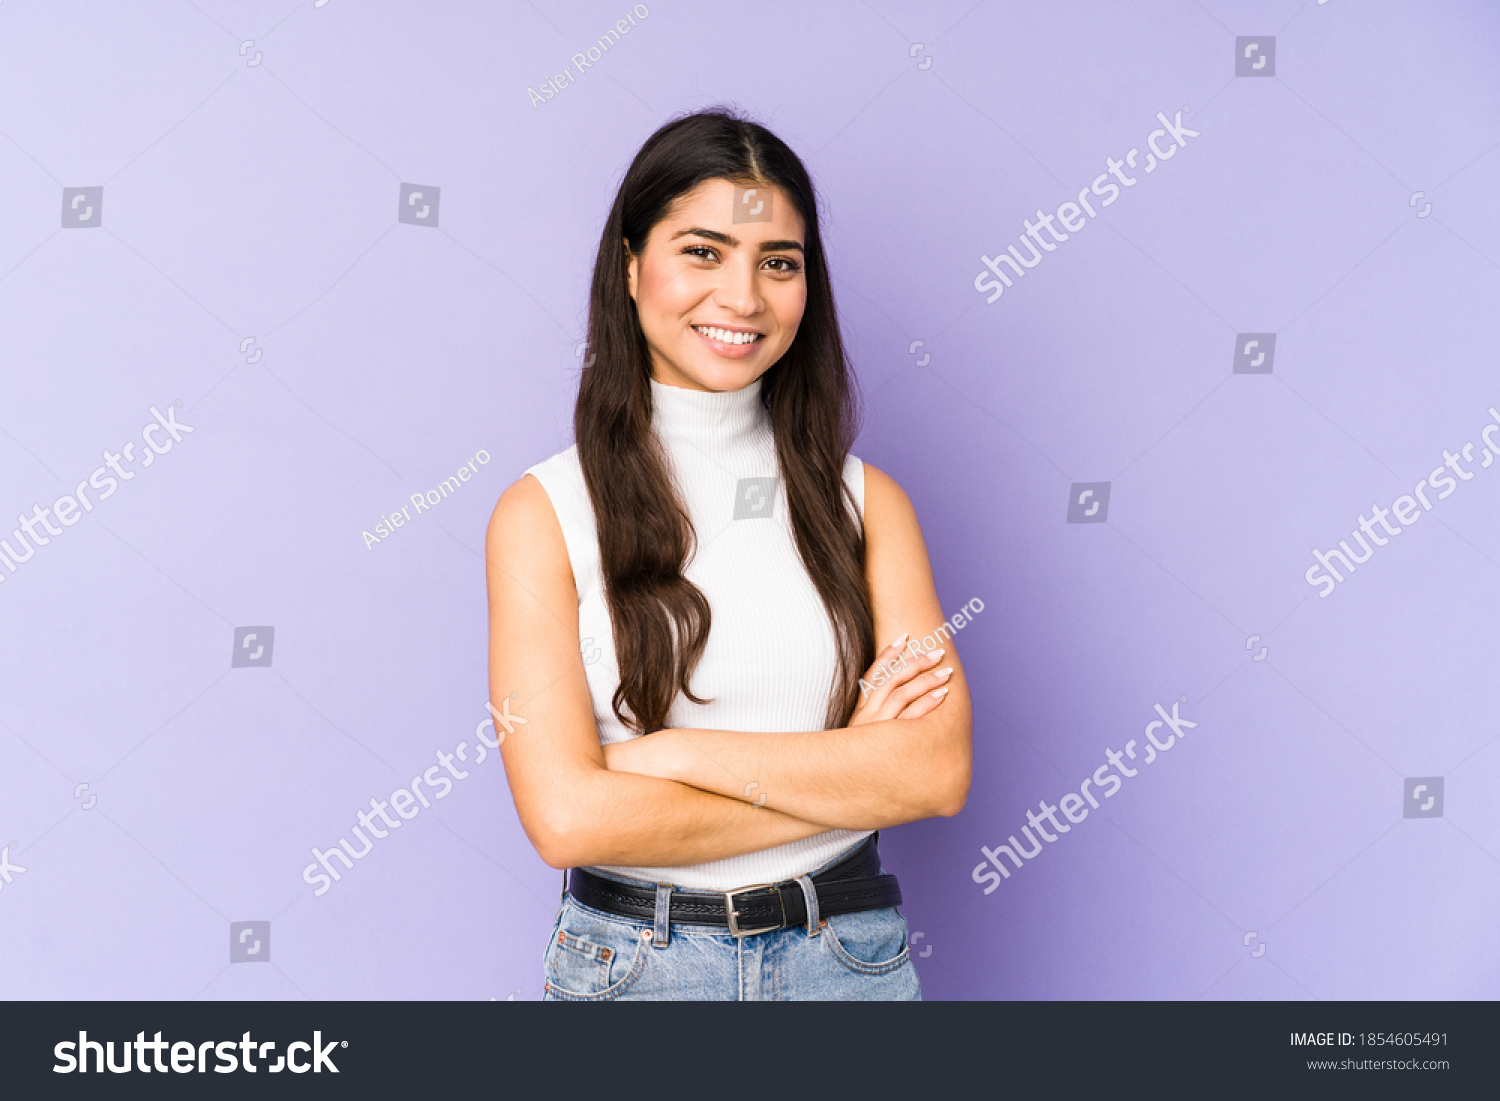 Young indian woman isolated on purple background who feels confident, crossing arms with determination. #1854605491